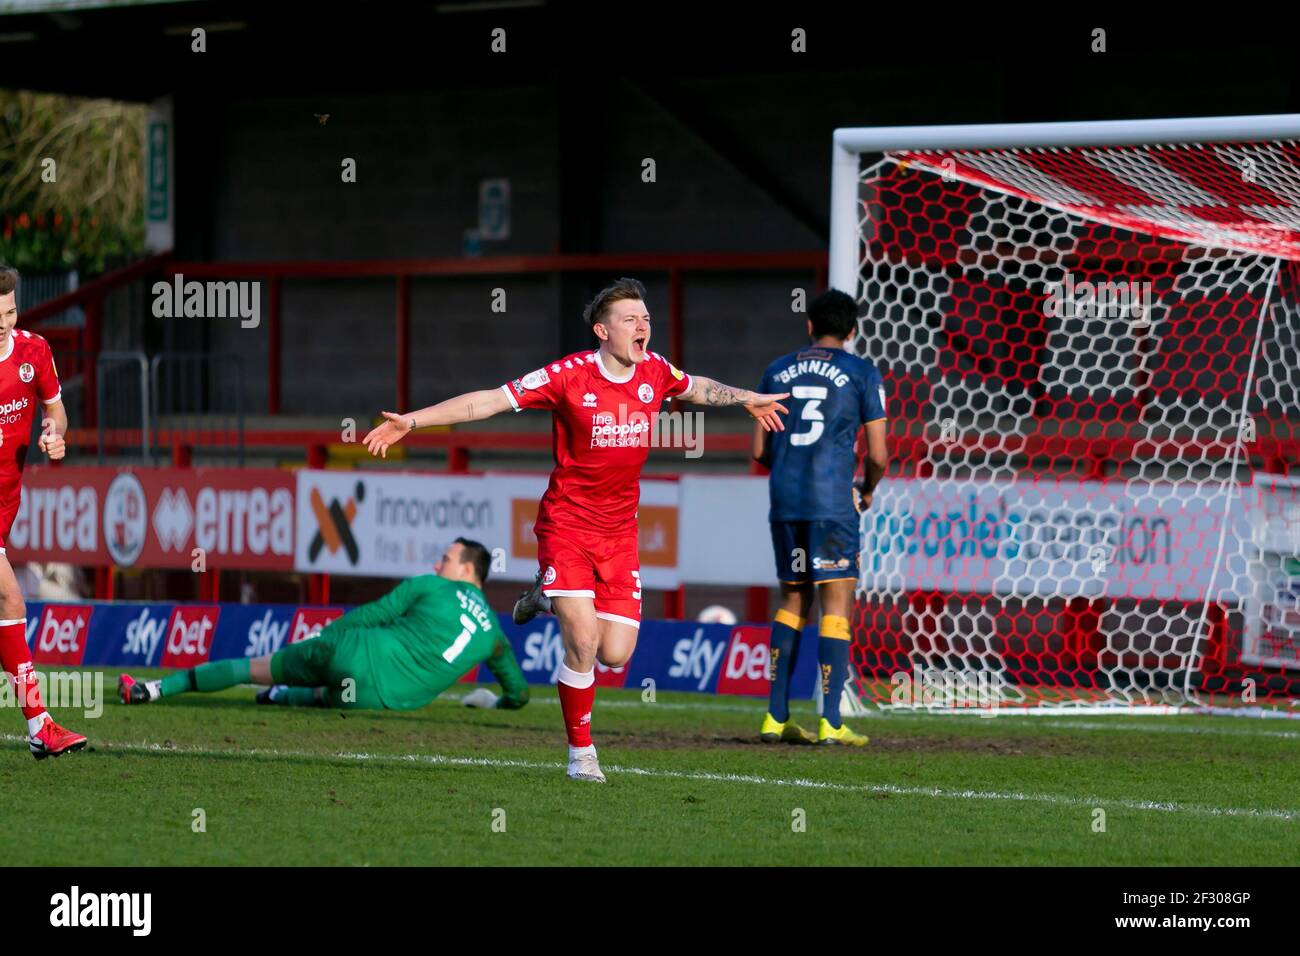 Crawley Town vs Mansfield Town,  Broadfield Stadium, Crawley, 13-03-2021. Picture by Jamie Evans - UK SPORTS IMAGES LTD Stock Photo